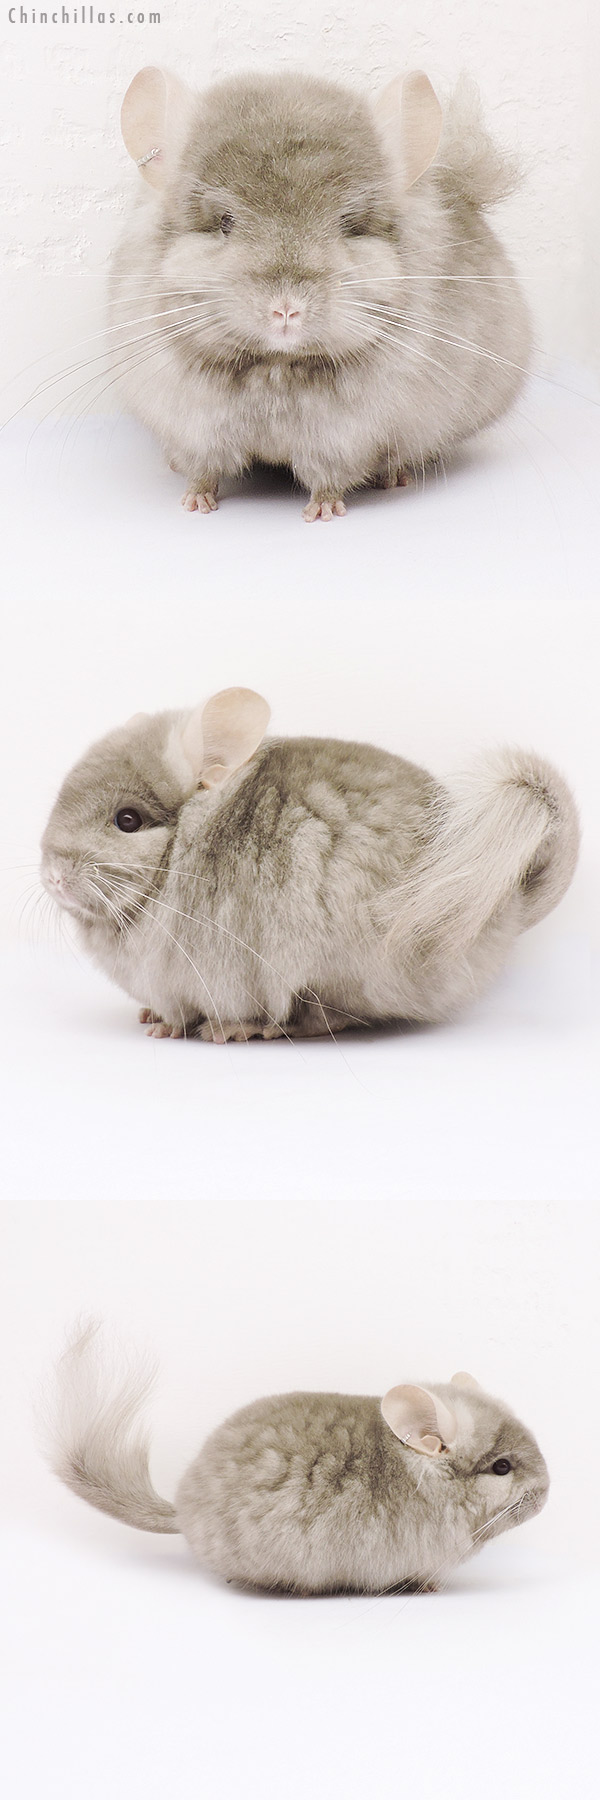 Chinchilla or related item offered for sale or export on Chinchillas.com - 15041 Exceptional Tan  Royal Persian Angora Male Chinchilla